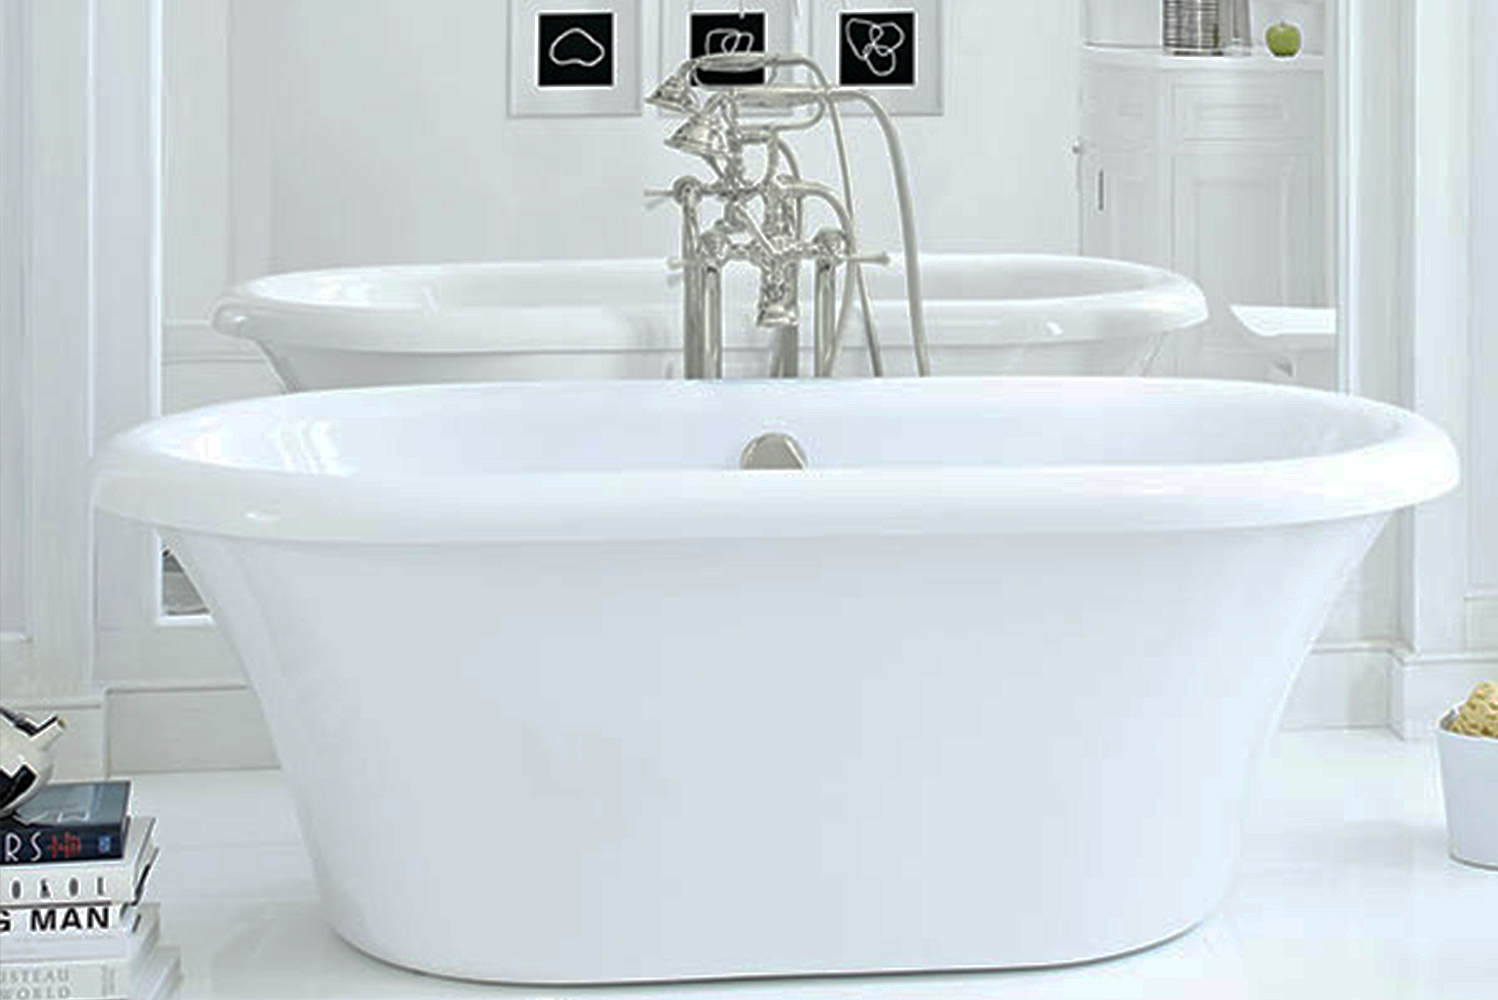 Introducing the St George freestanding soaking tub by DXV 